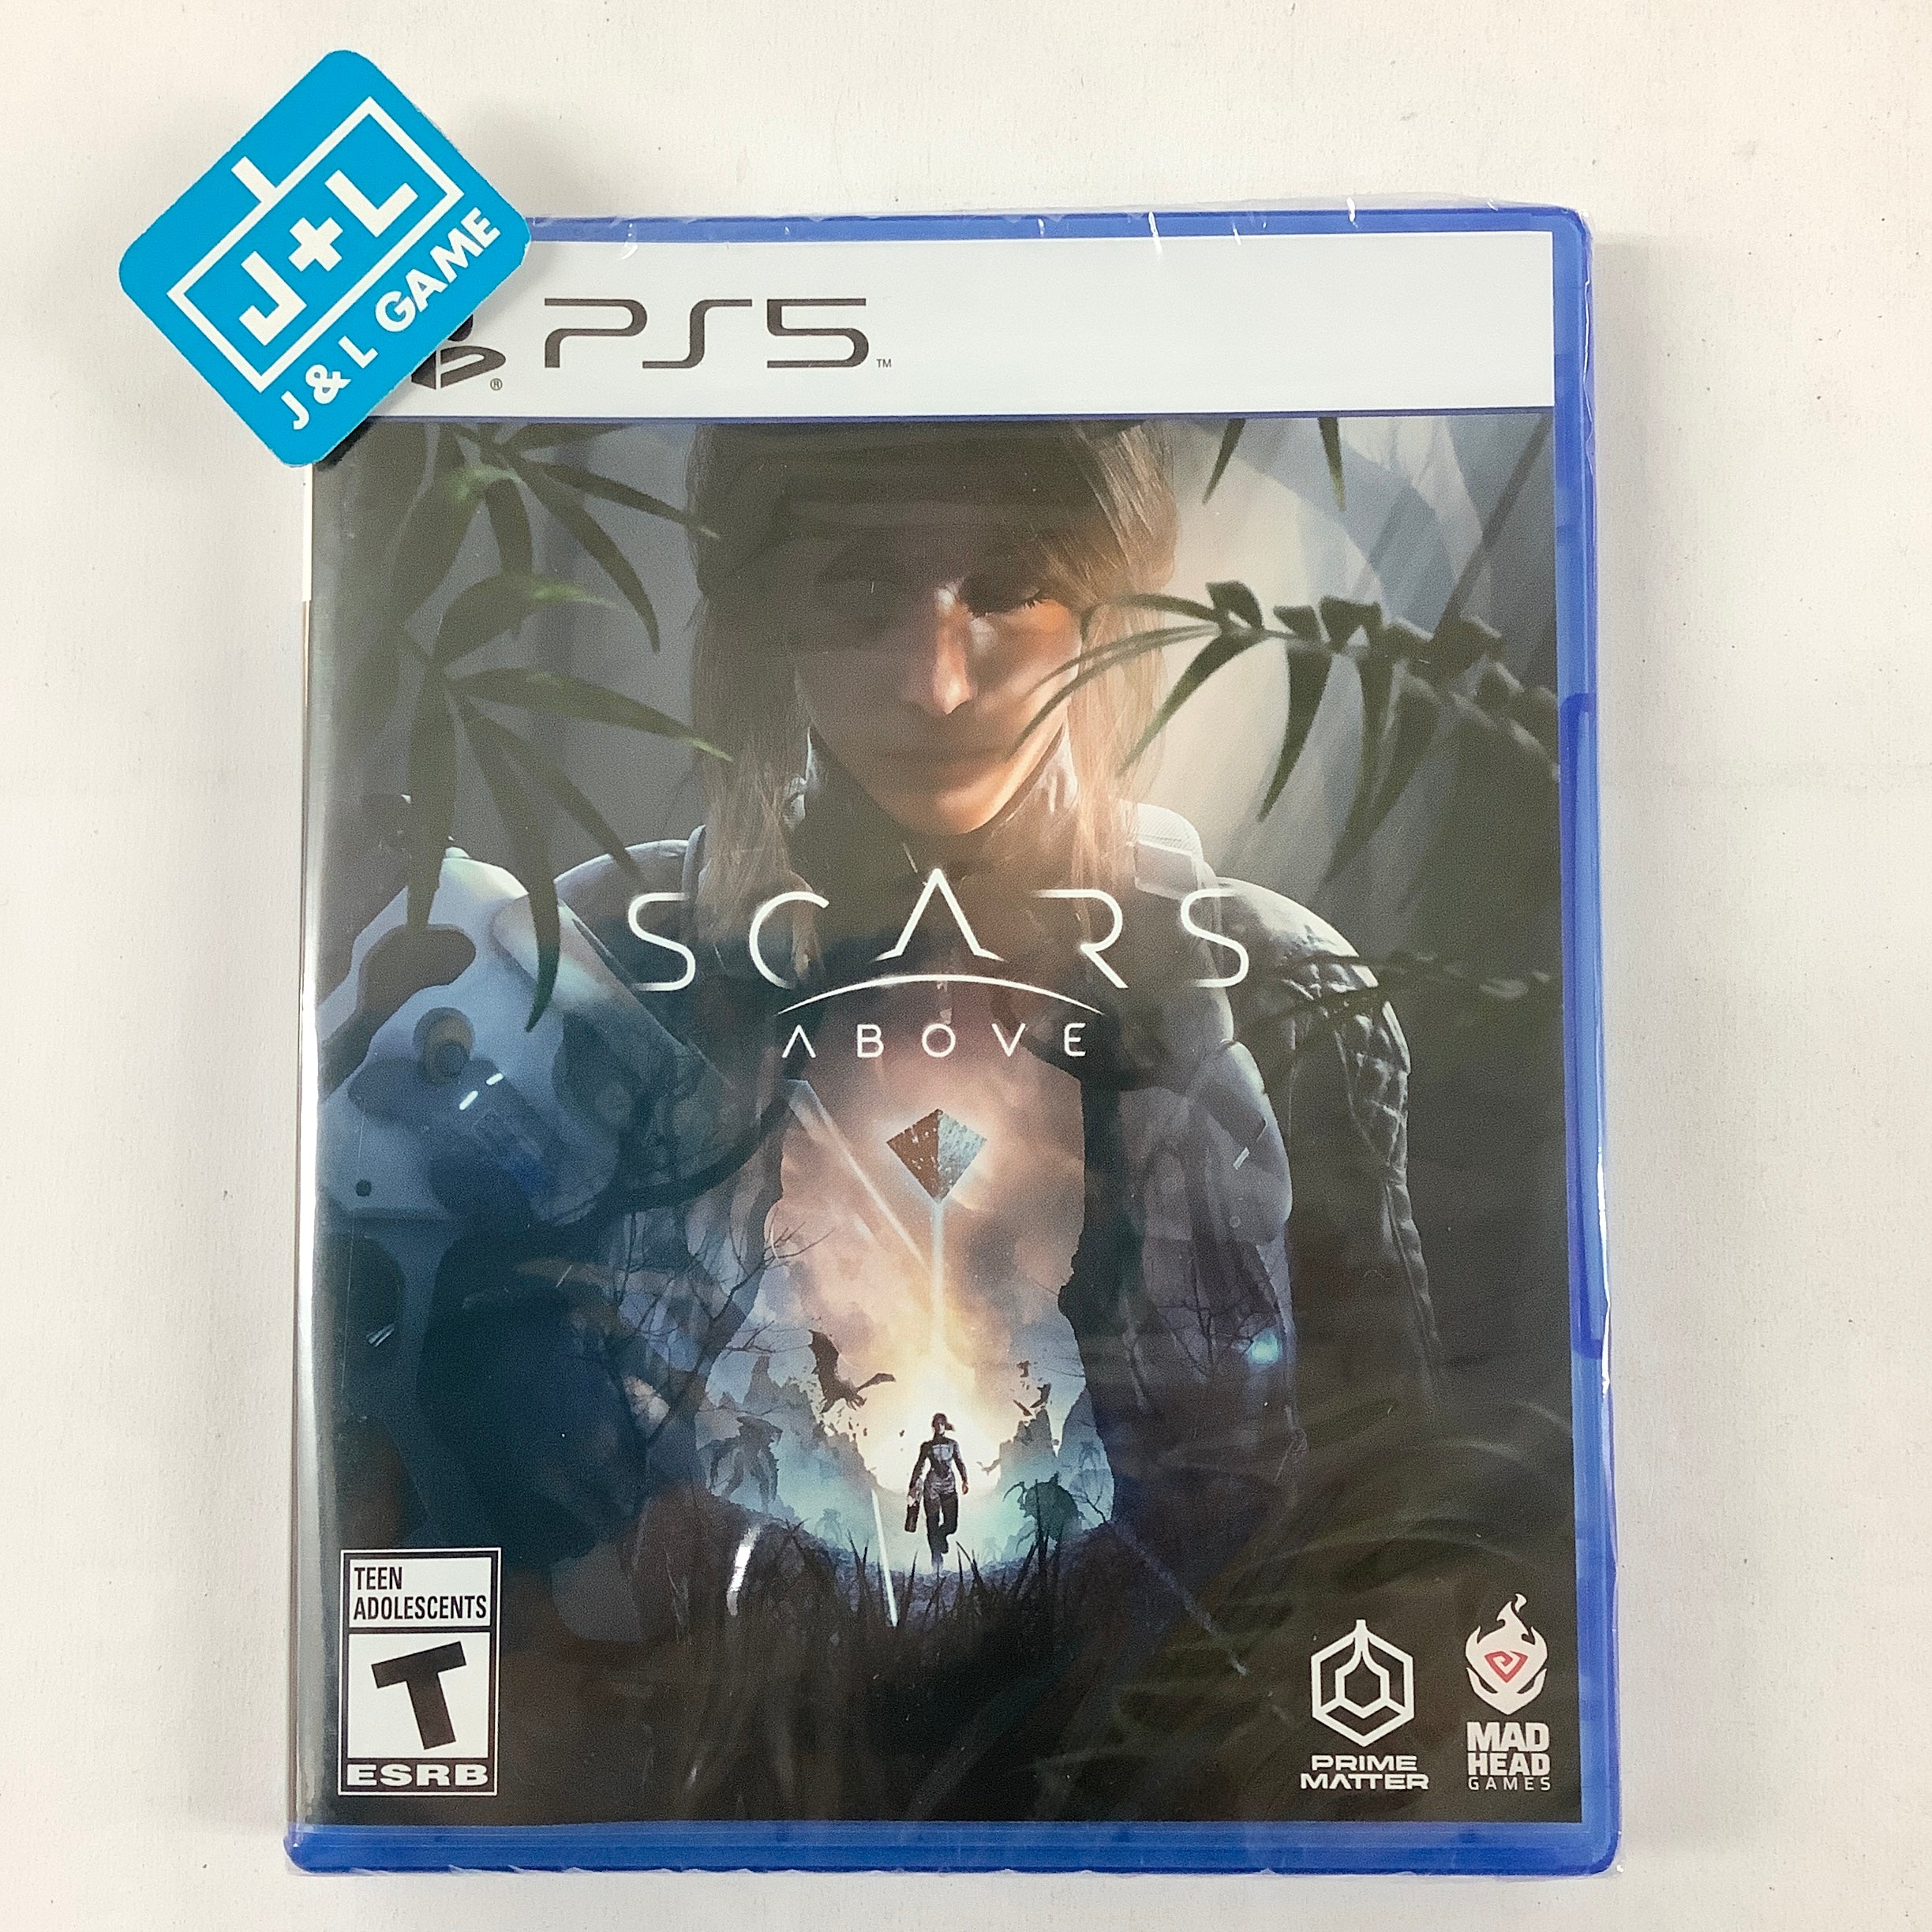 Scars Above - (PS5) PlayStation 5 Video Games Prime Matter   